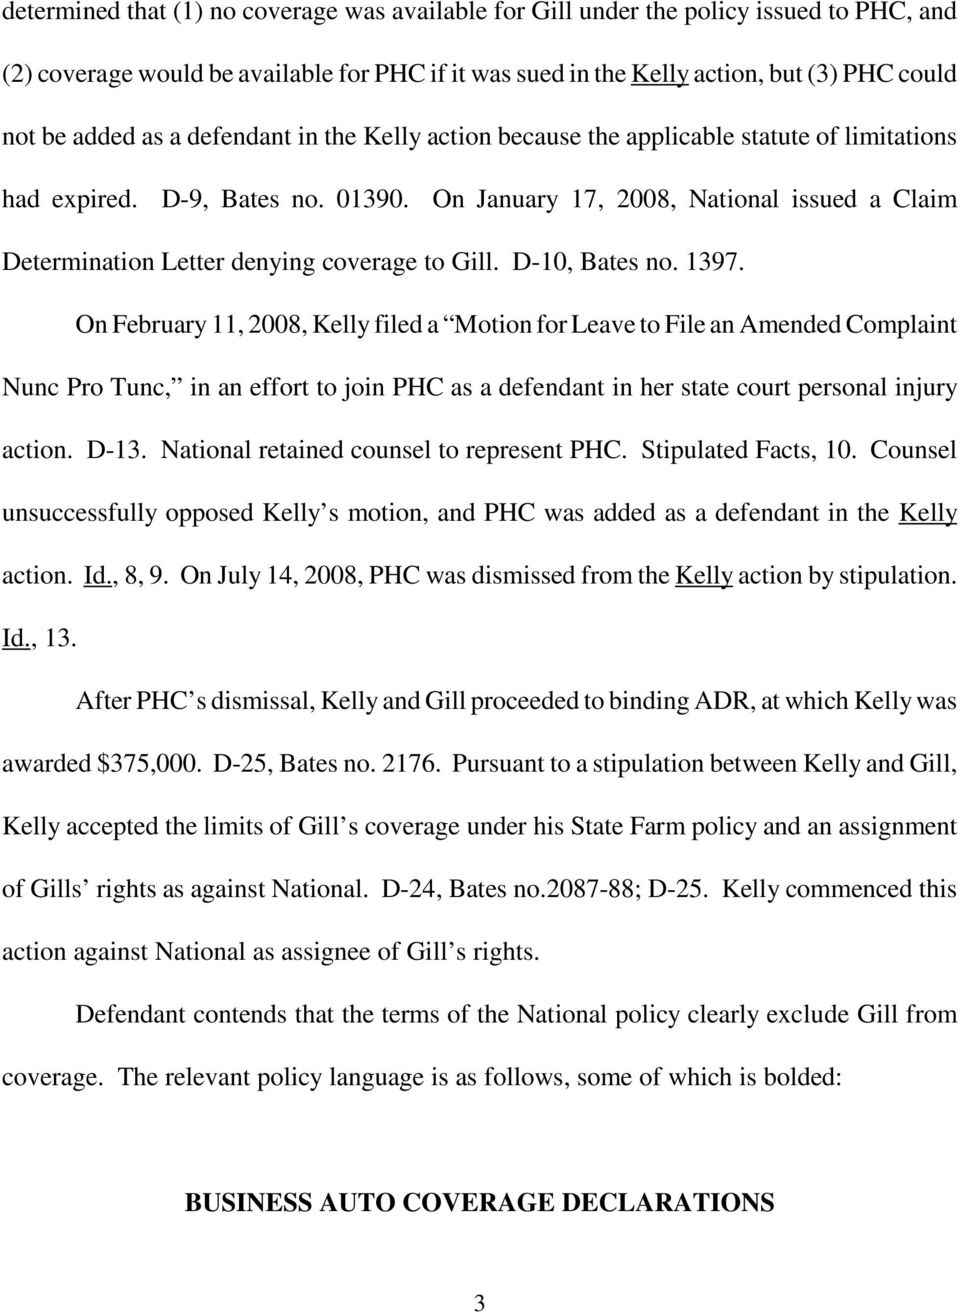 On January 17, 2008, National issued a Claim Determination Letter denying coverage to Gill. D-10, Bates no. 1397.